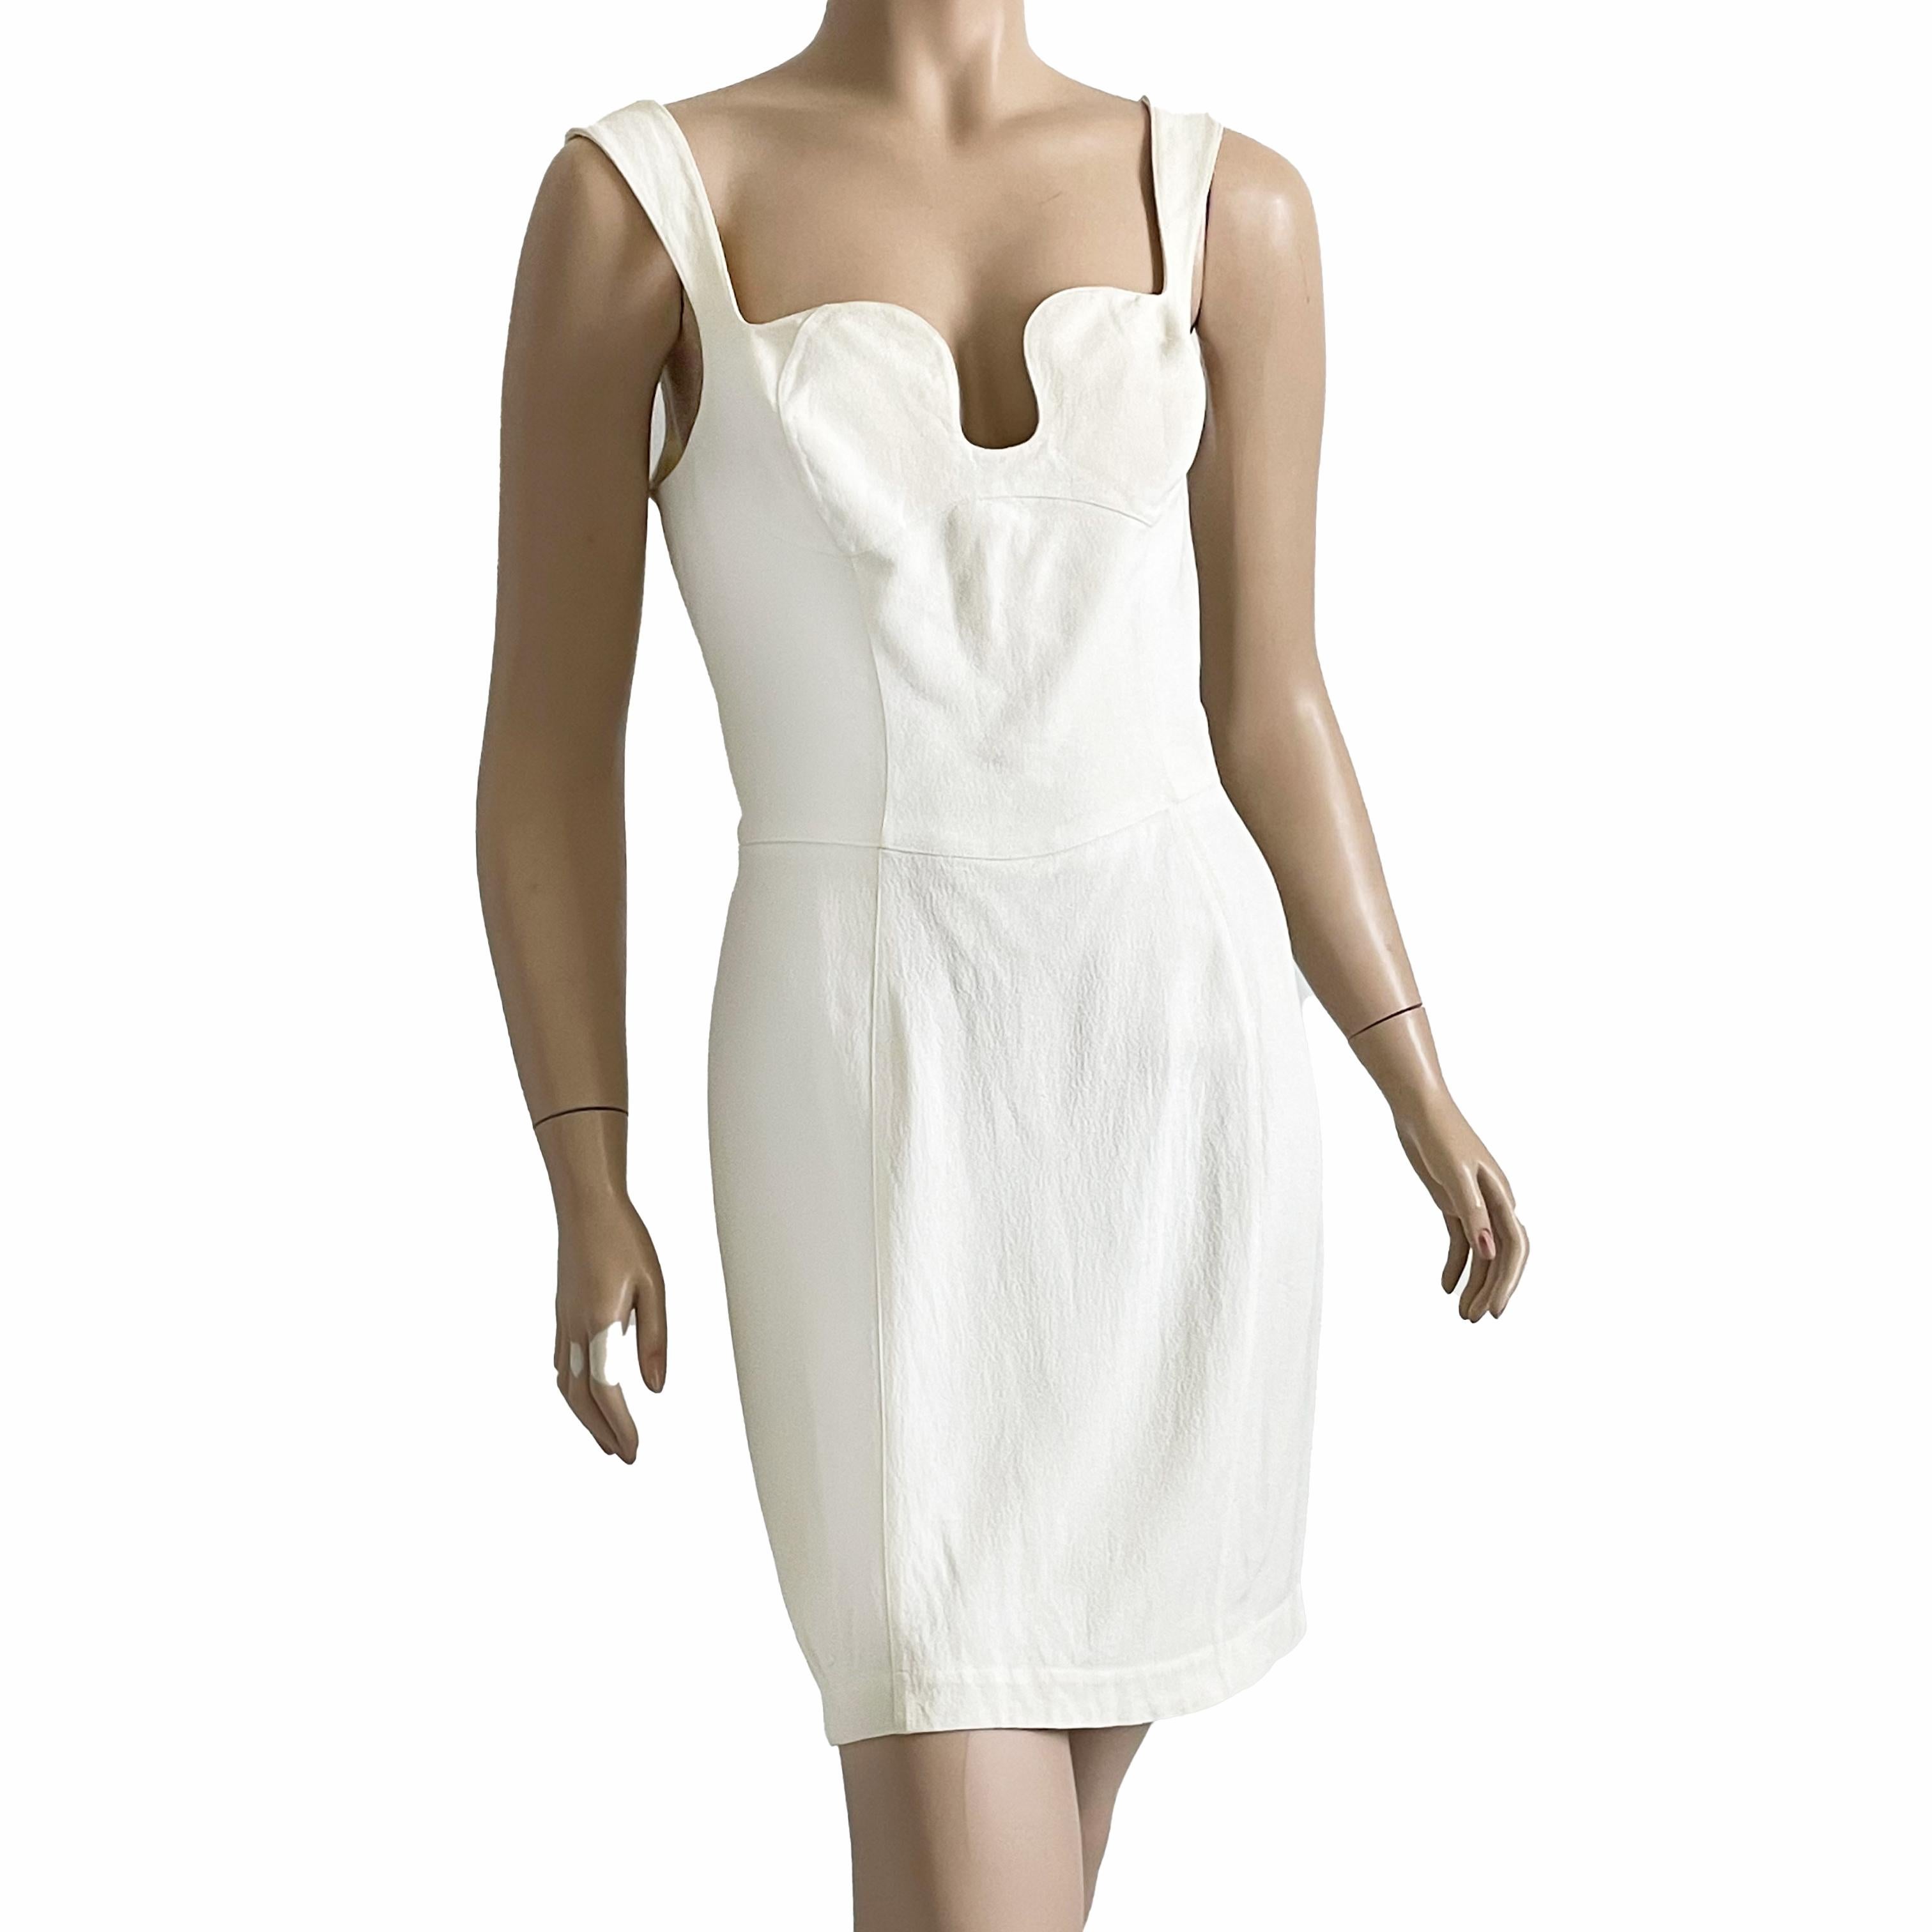 Thierry Mugler Cocktail Dress White Crepe Sculptural Chic Vintage 90s Sz 40 HTF For Sale 5